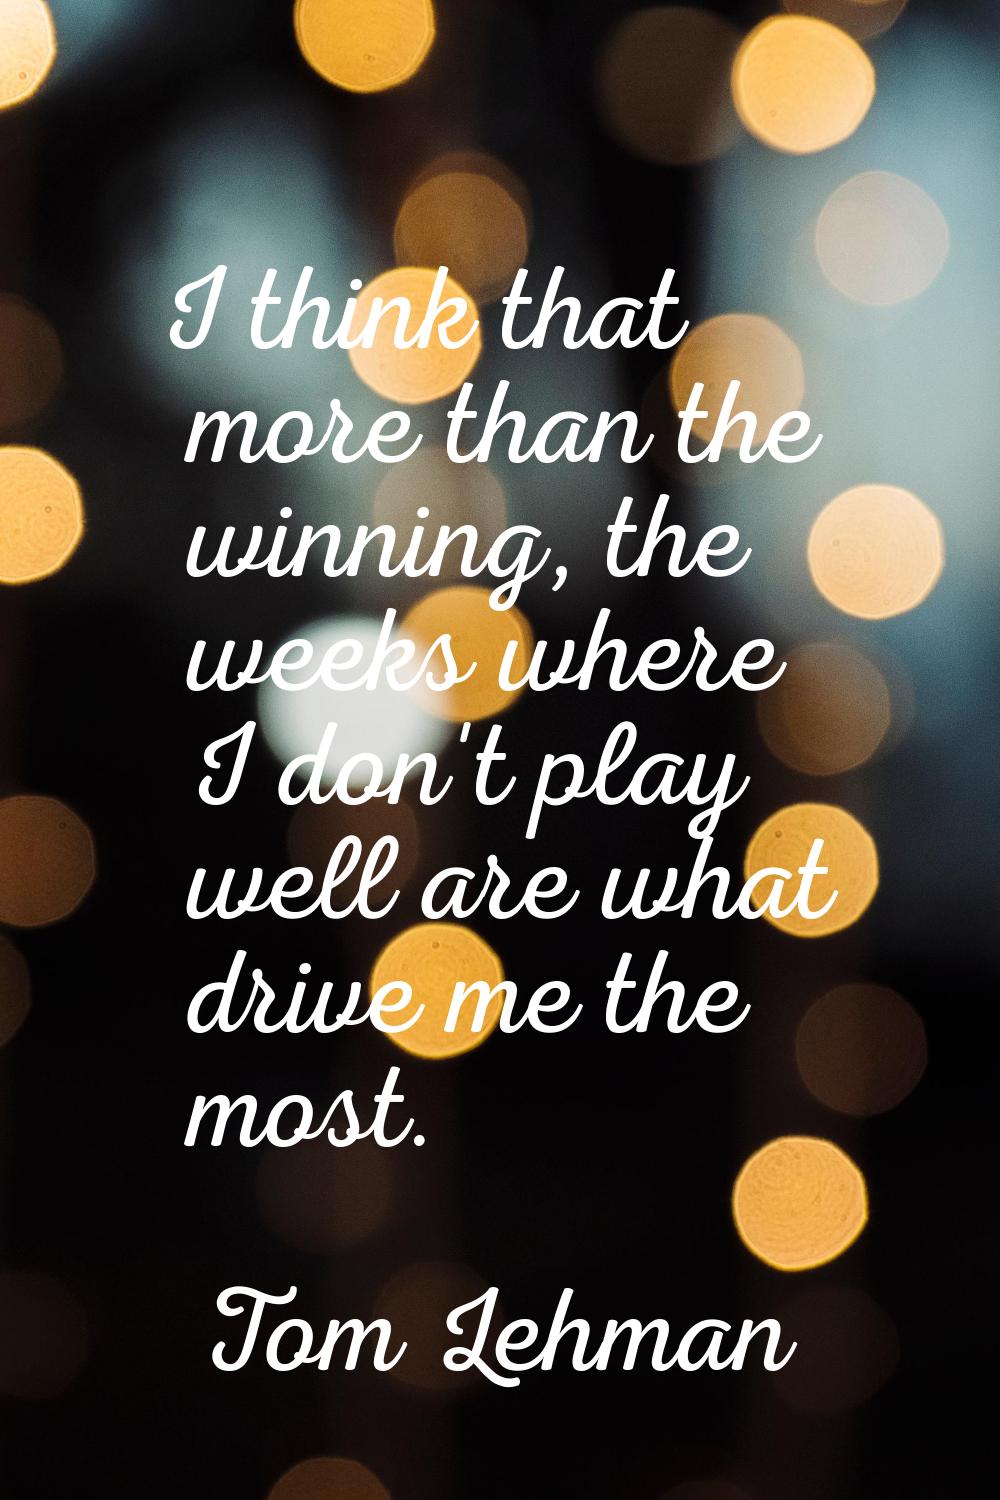 I think that more than the winning, the weeks where I don't play well are what drive me the most.